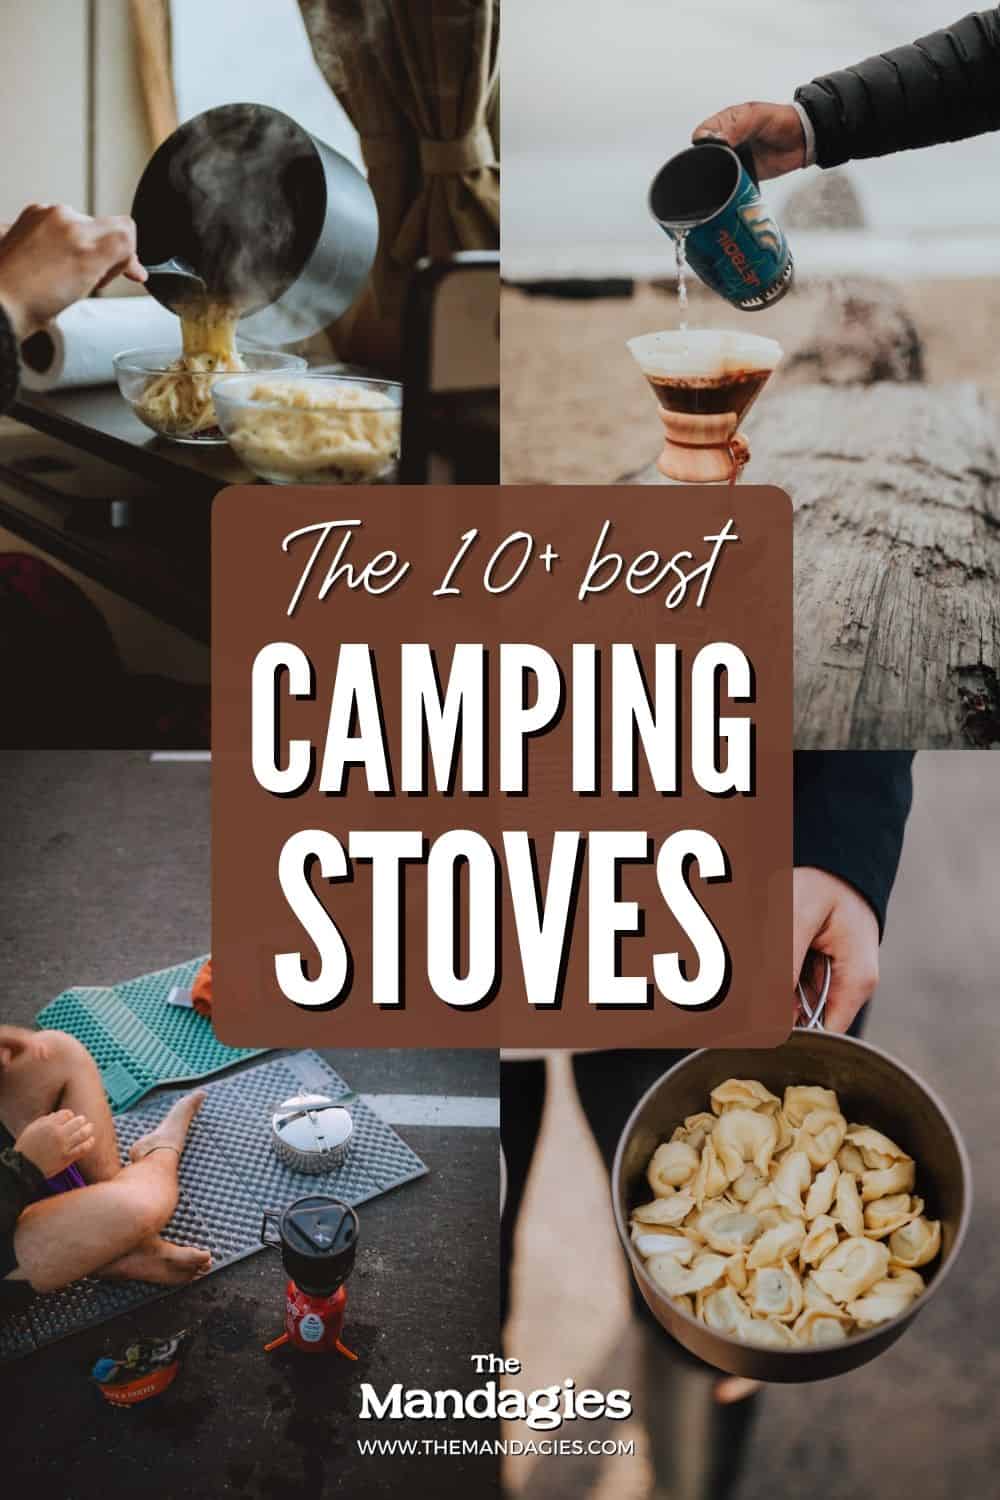 All the Best Camping Stoves For Car Camping and Backpacking #camping #campingreviews #stoves #cooking